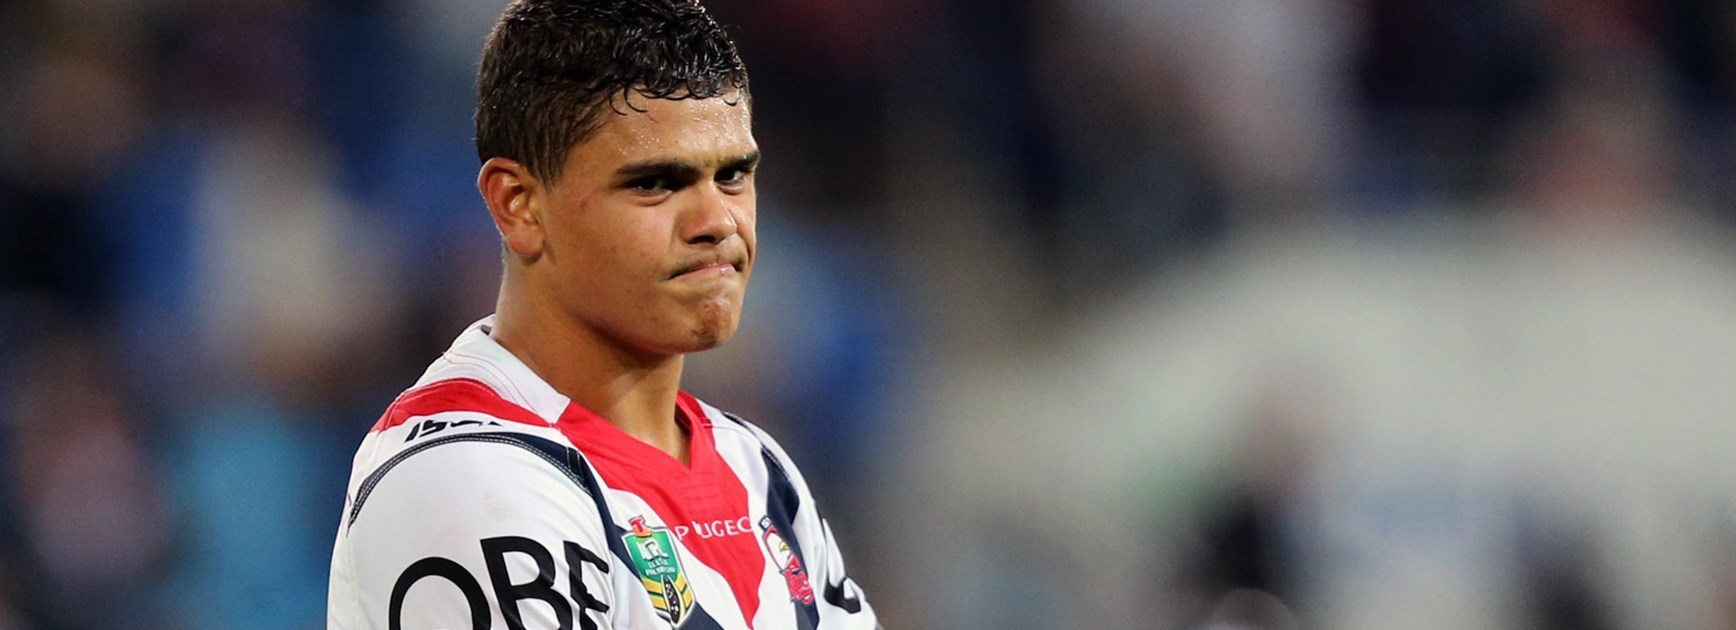 Roosters fullback Latrell Mitchell scored a sensational try in Round 10.